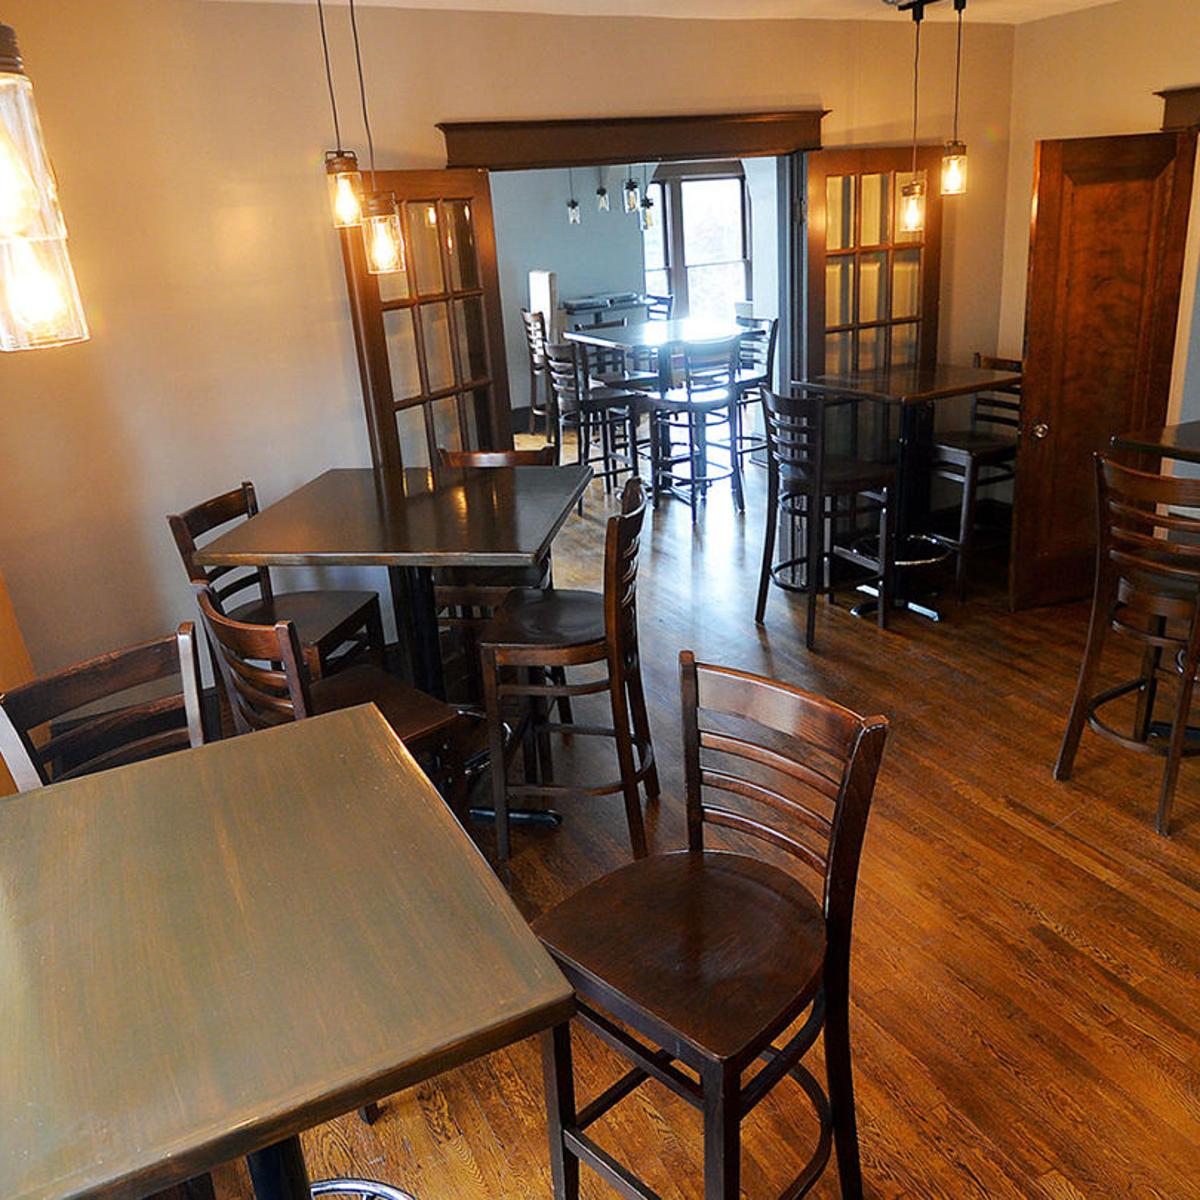 Fireplace Leaking Water Inspirational Martinsburg Restaurant Building Restored for Fine Dining